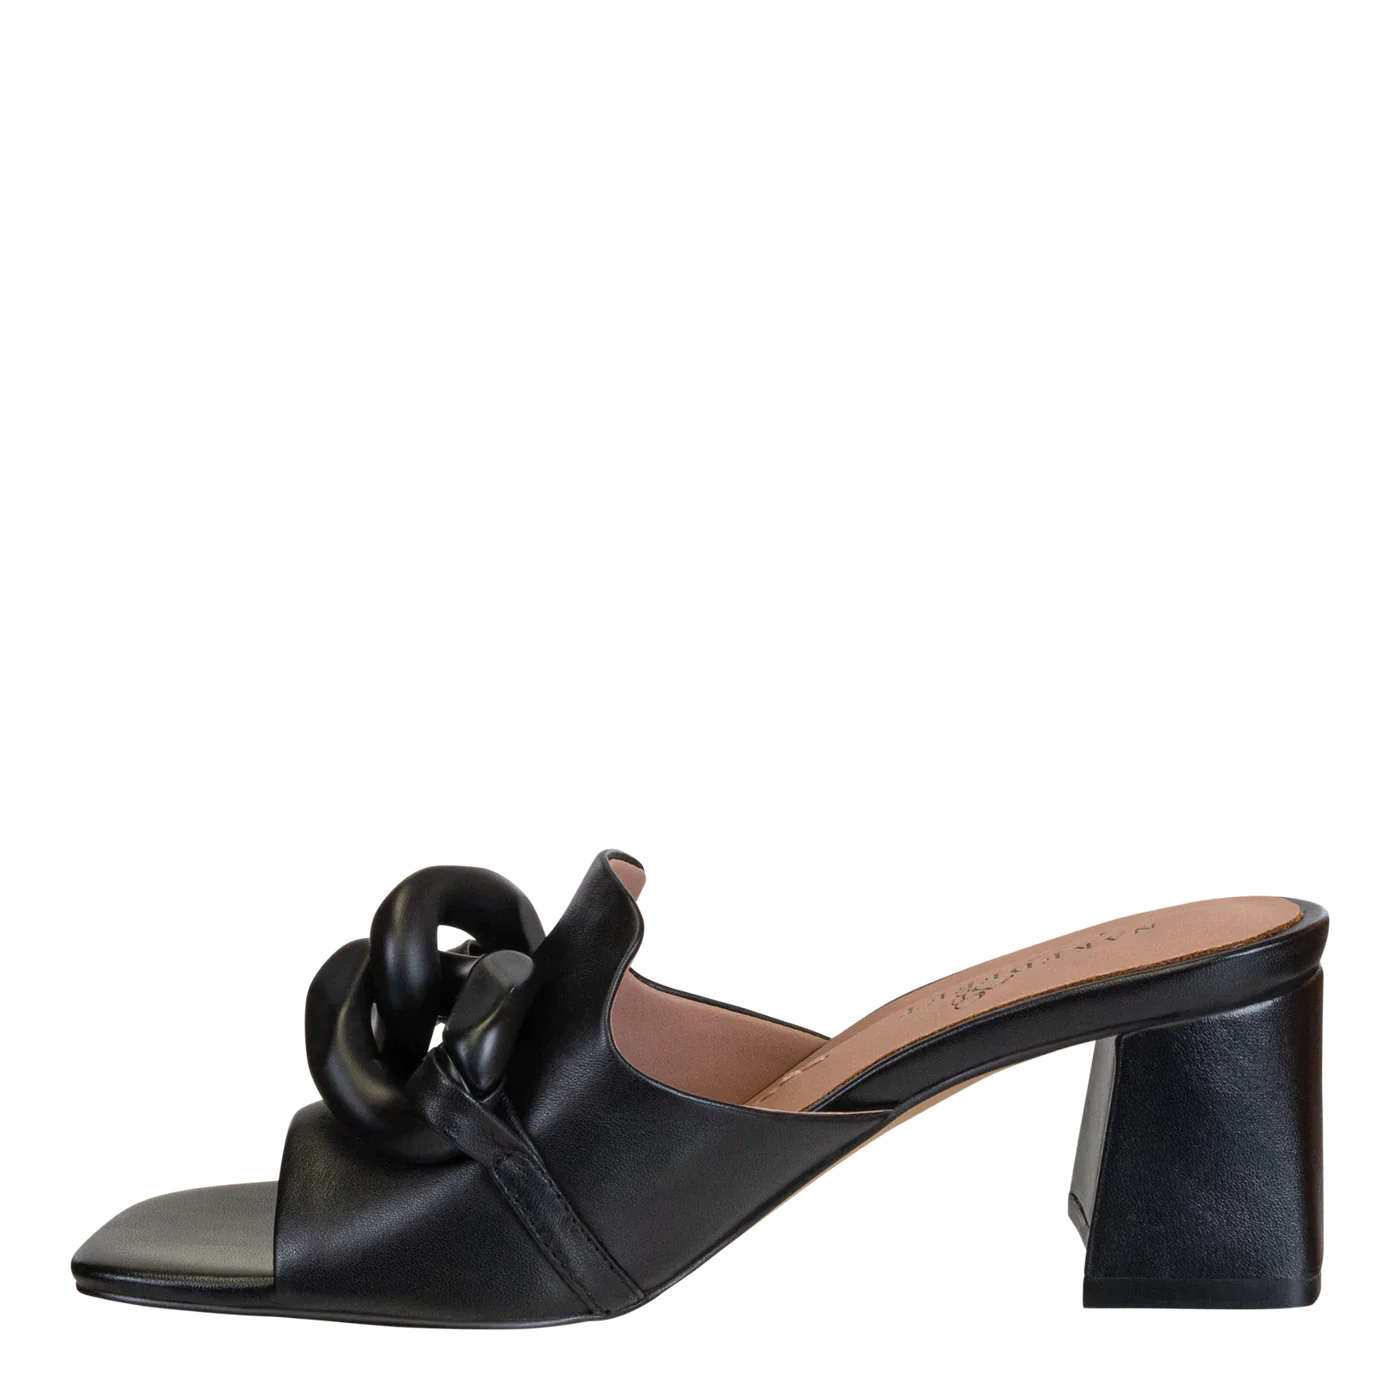 Coterie in Black Heeled Sandals by Naked Feet